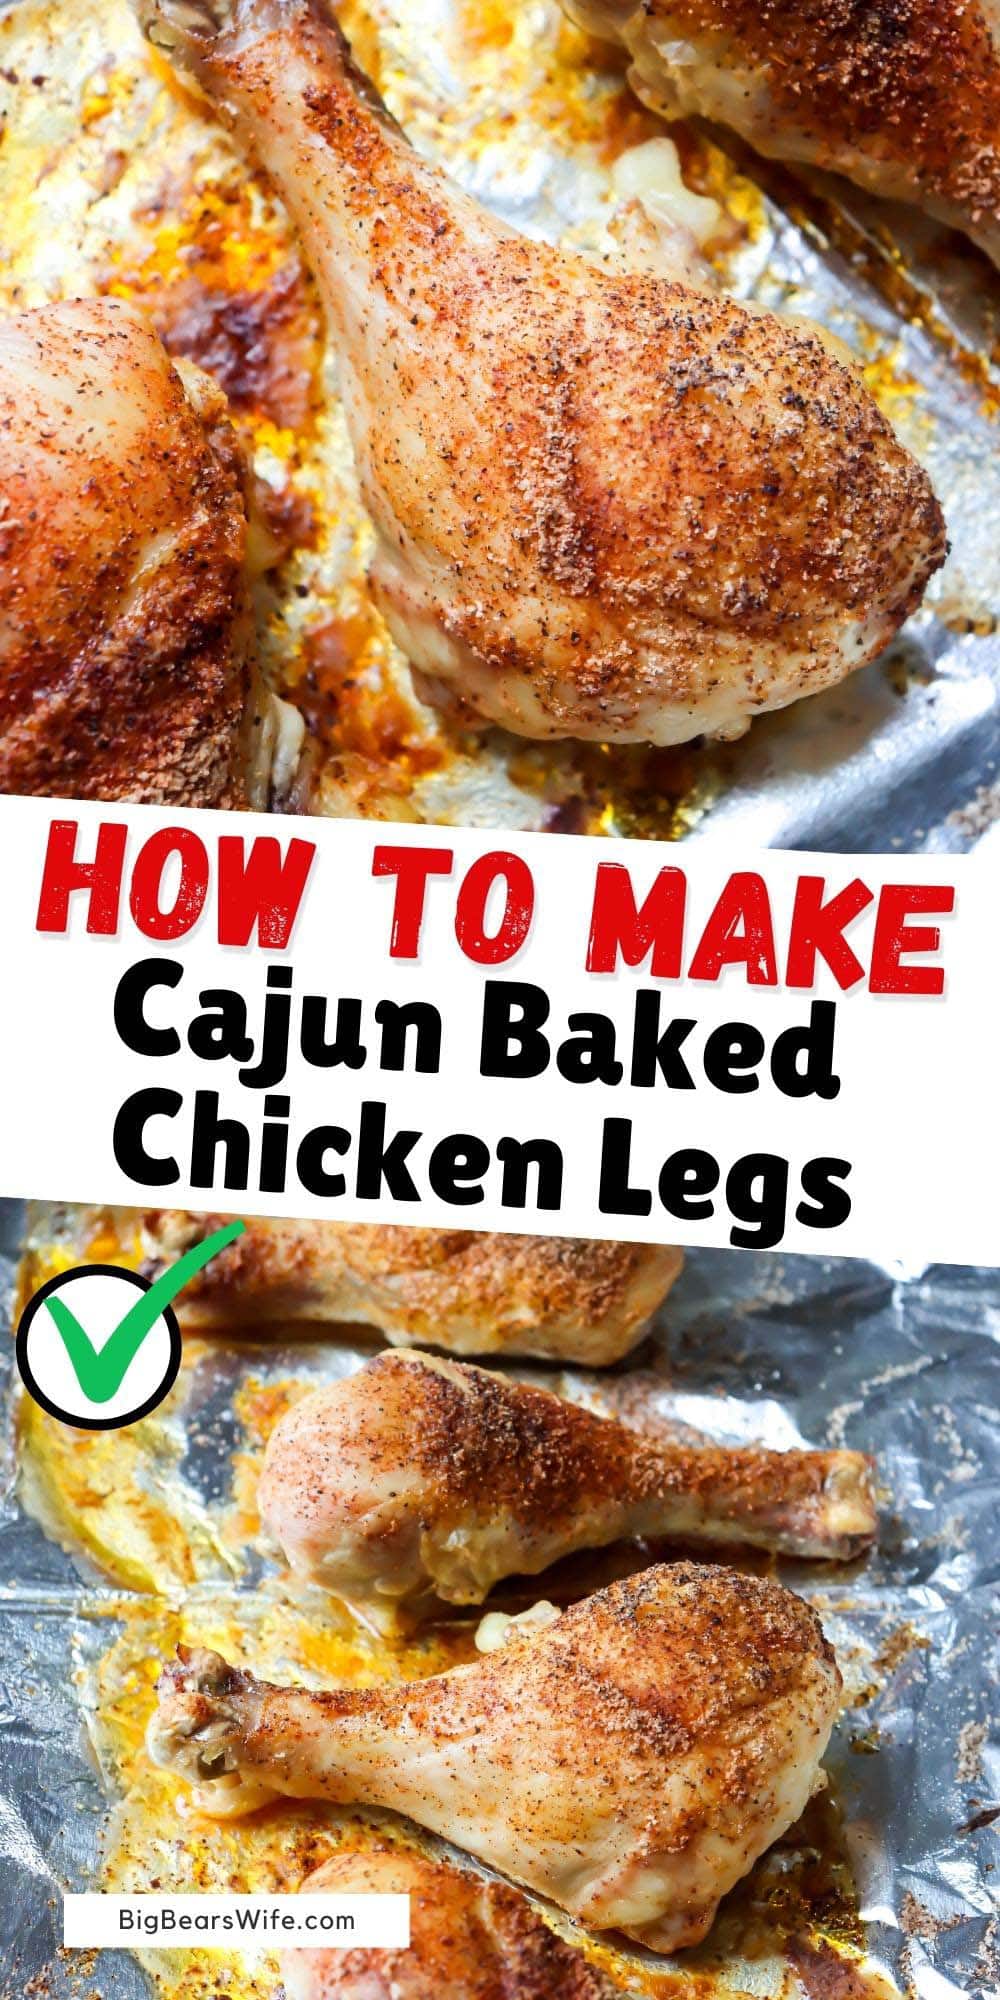 These Cajun Baked Chicken Legs are perfectly baked and ready in about 45 minutes! Super  juicy and full of cajun flavor! Just Season, Bake and Serve with your favorite side dish for a prefect meal!  via @bigbearswife